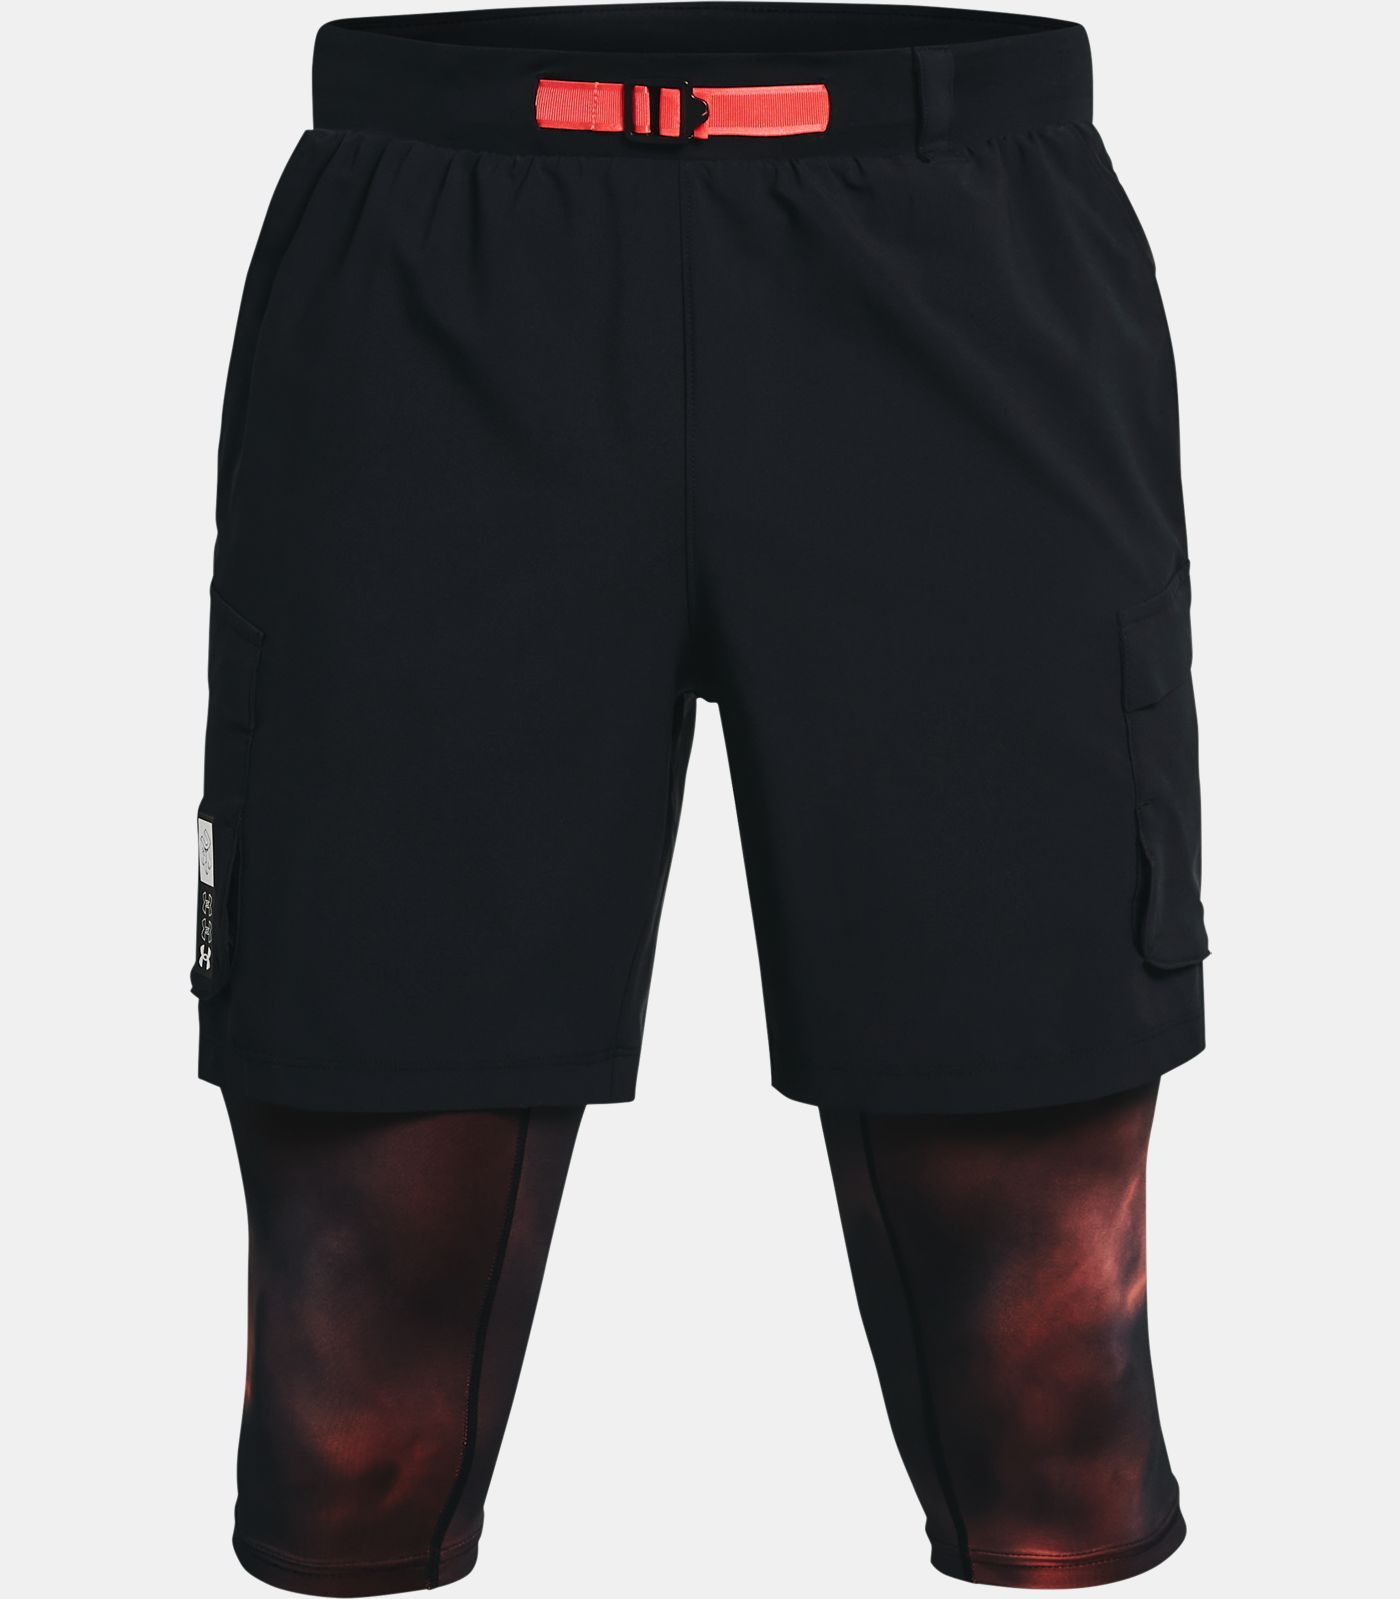 Under Armour Run Anywhere 2 In 1 Men's Shorts